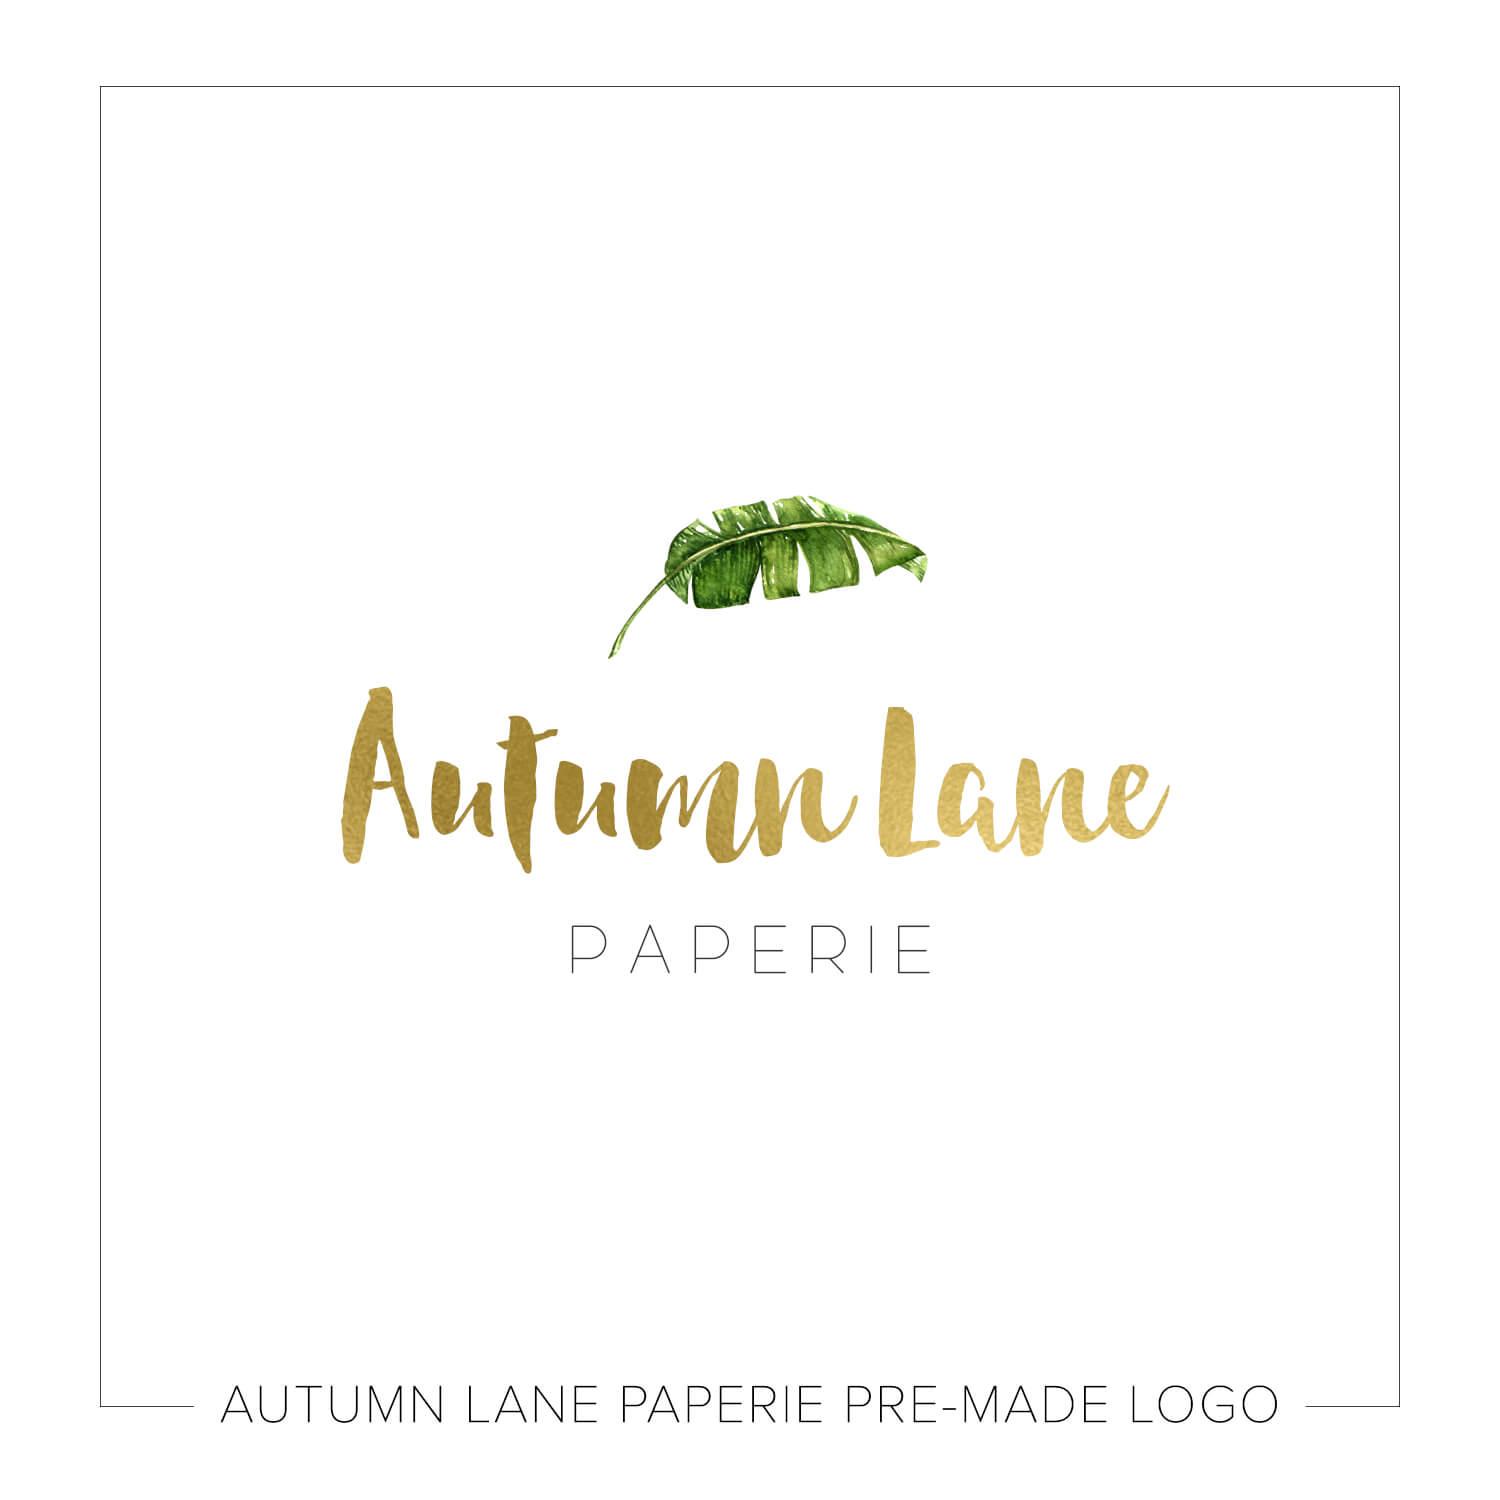 A Great Green and Gold Logo - Deep Green & Gold Leaf Logo J96 | Autumn Lane Paperie